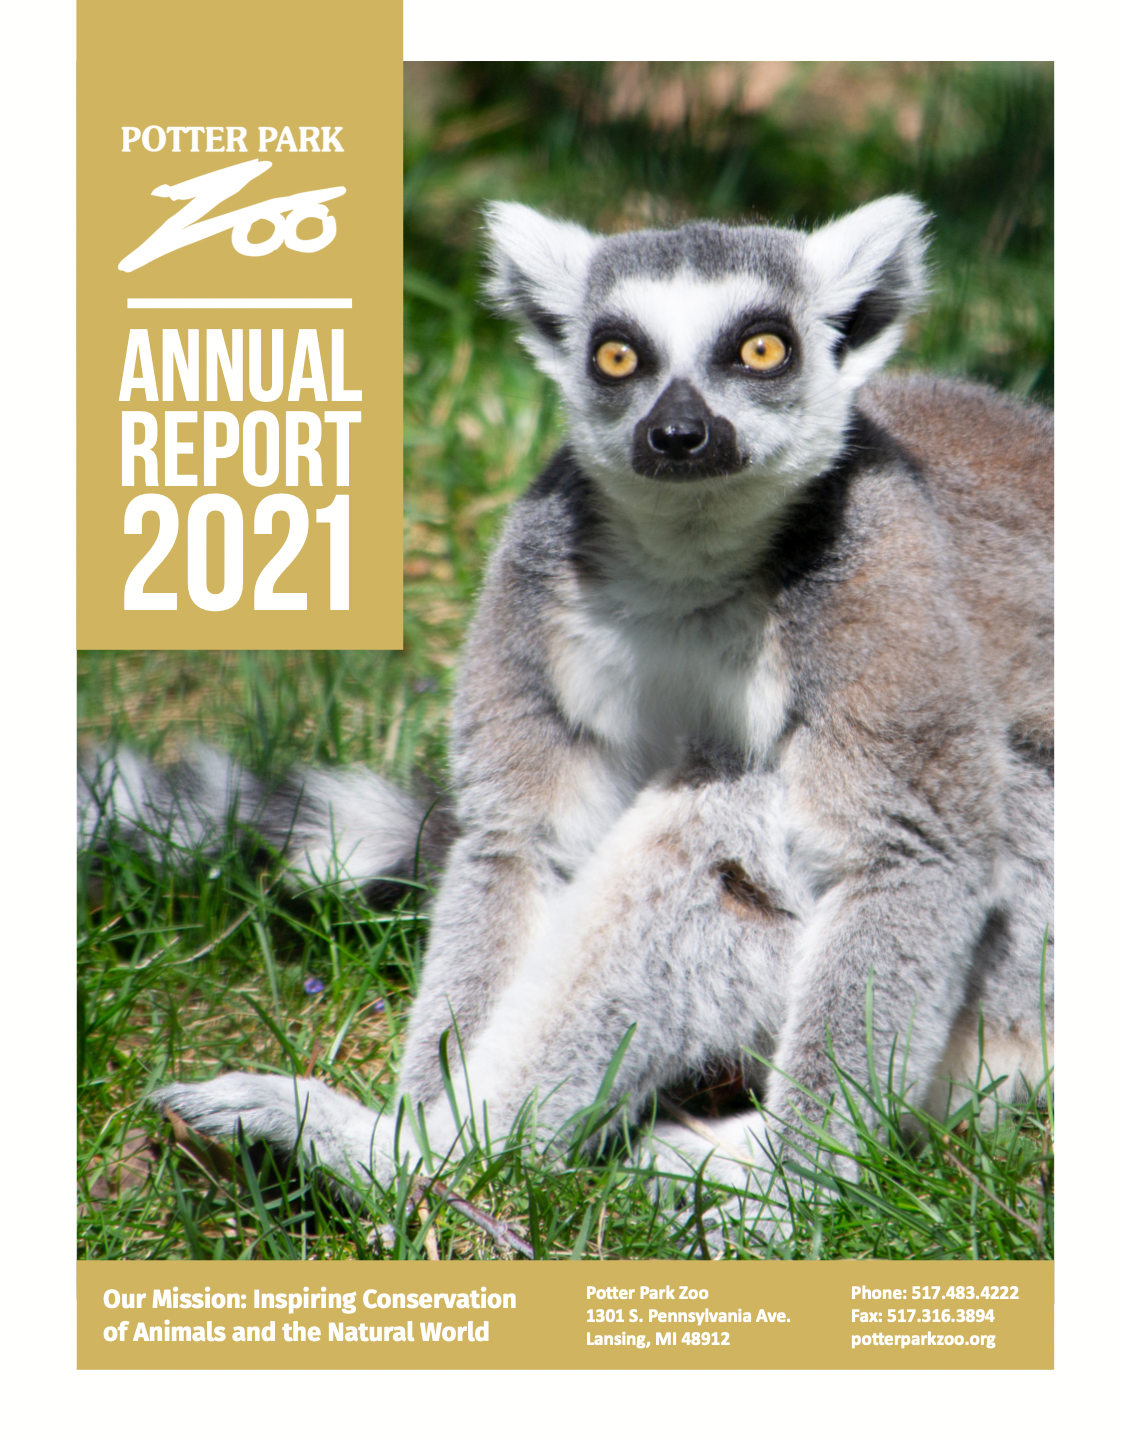 Cover of the Potter Park Zoo 2021 Annual Report.